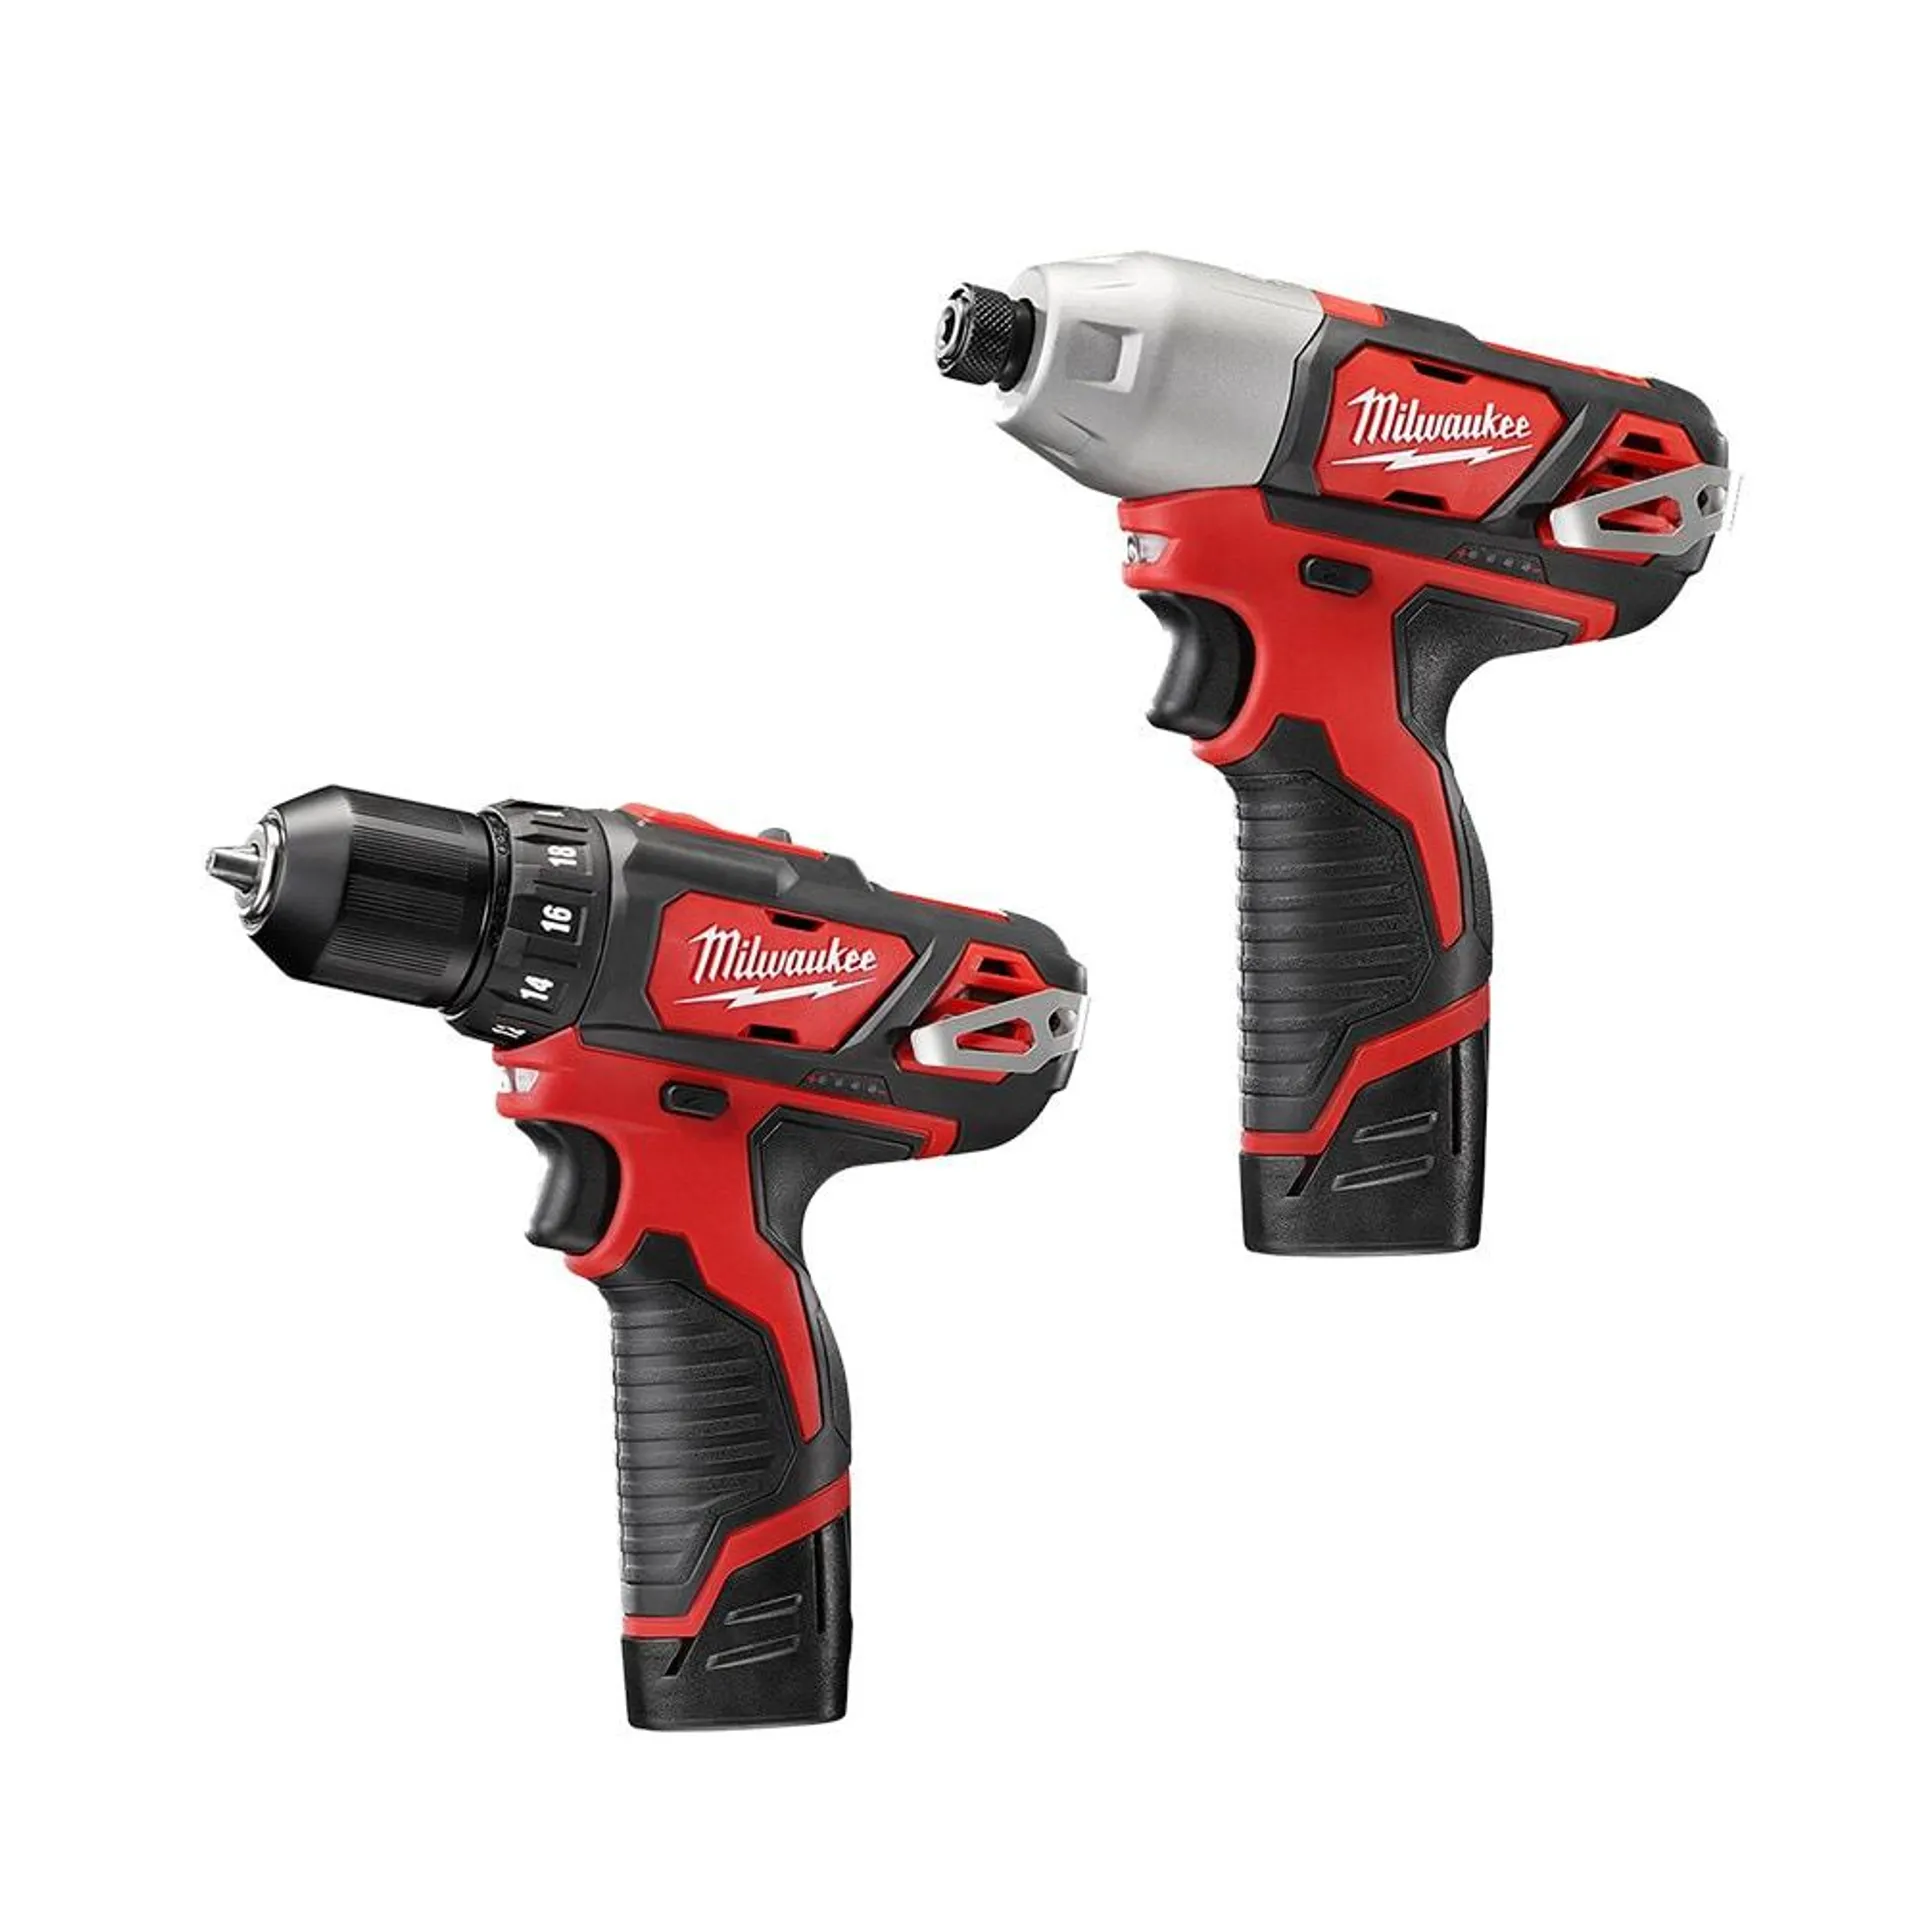 M12 12V Lithium-Ion Cordless Drill Driver/Impact Driver Combo Kit (2-Tool) with (2) 1.5Ah Batteries